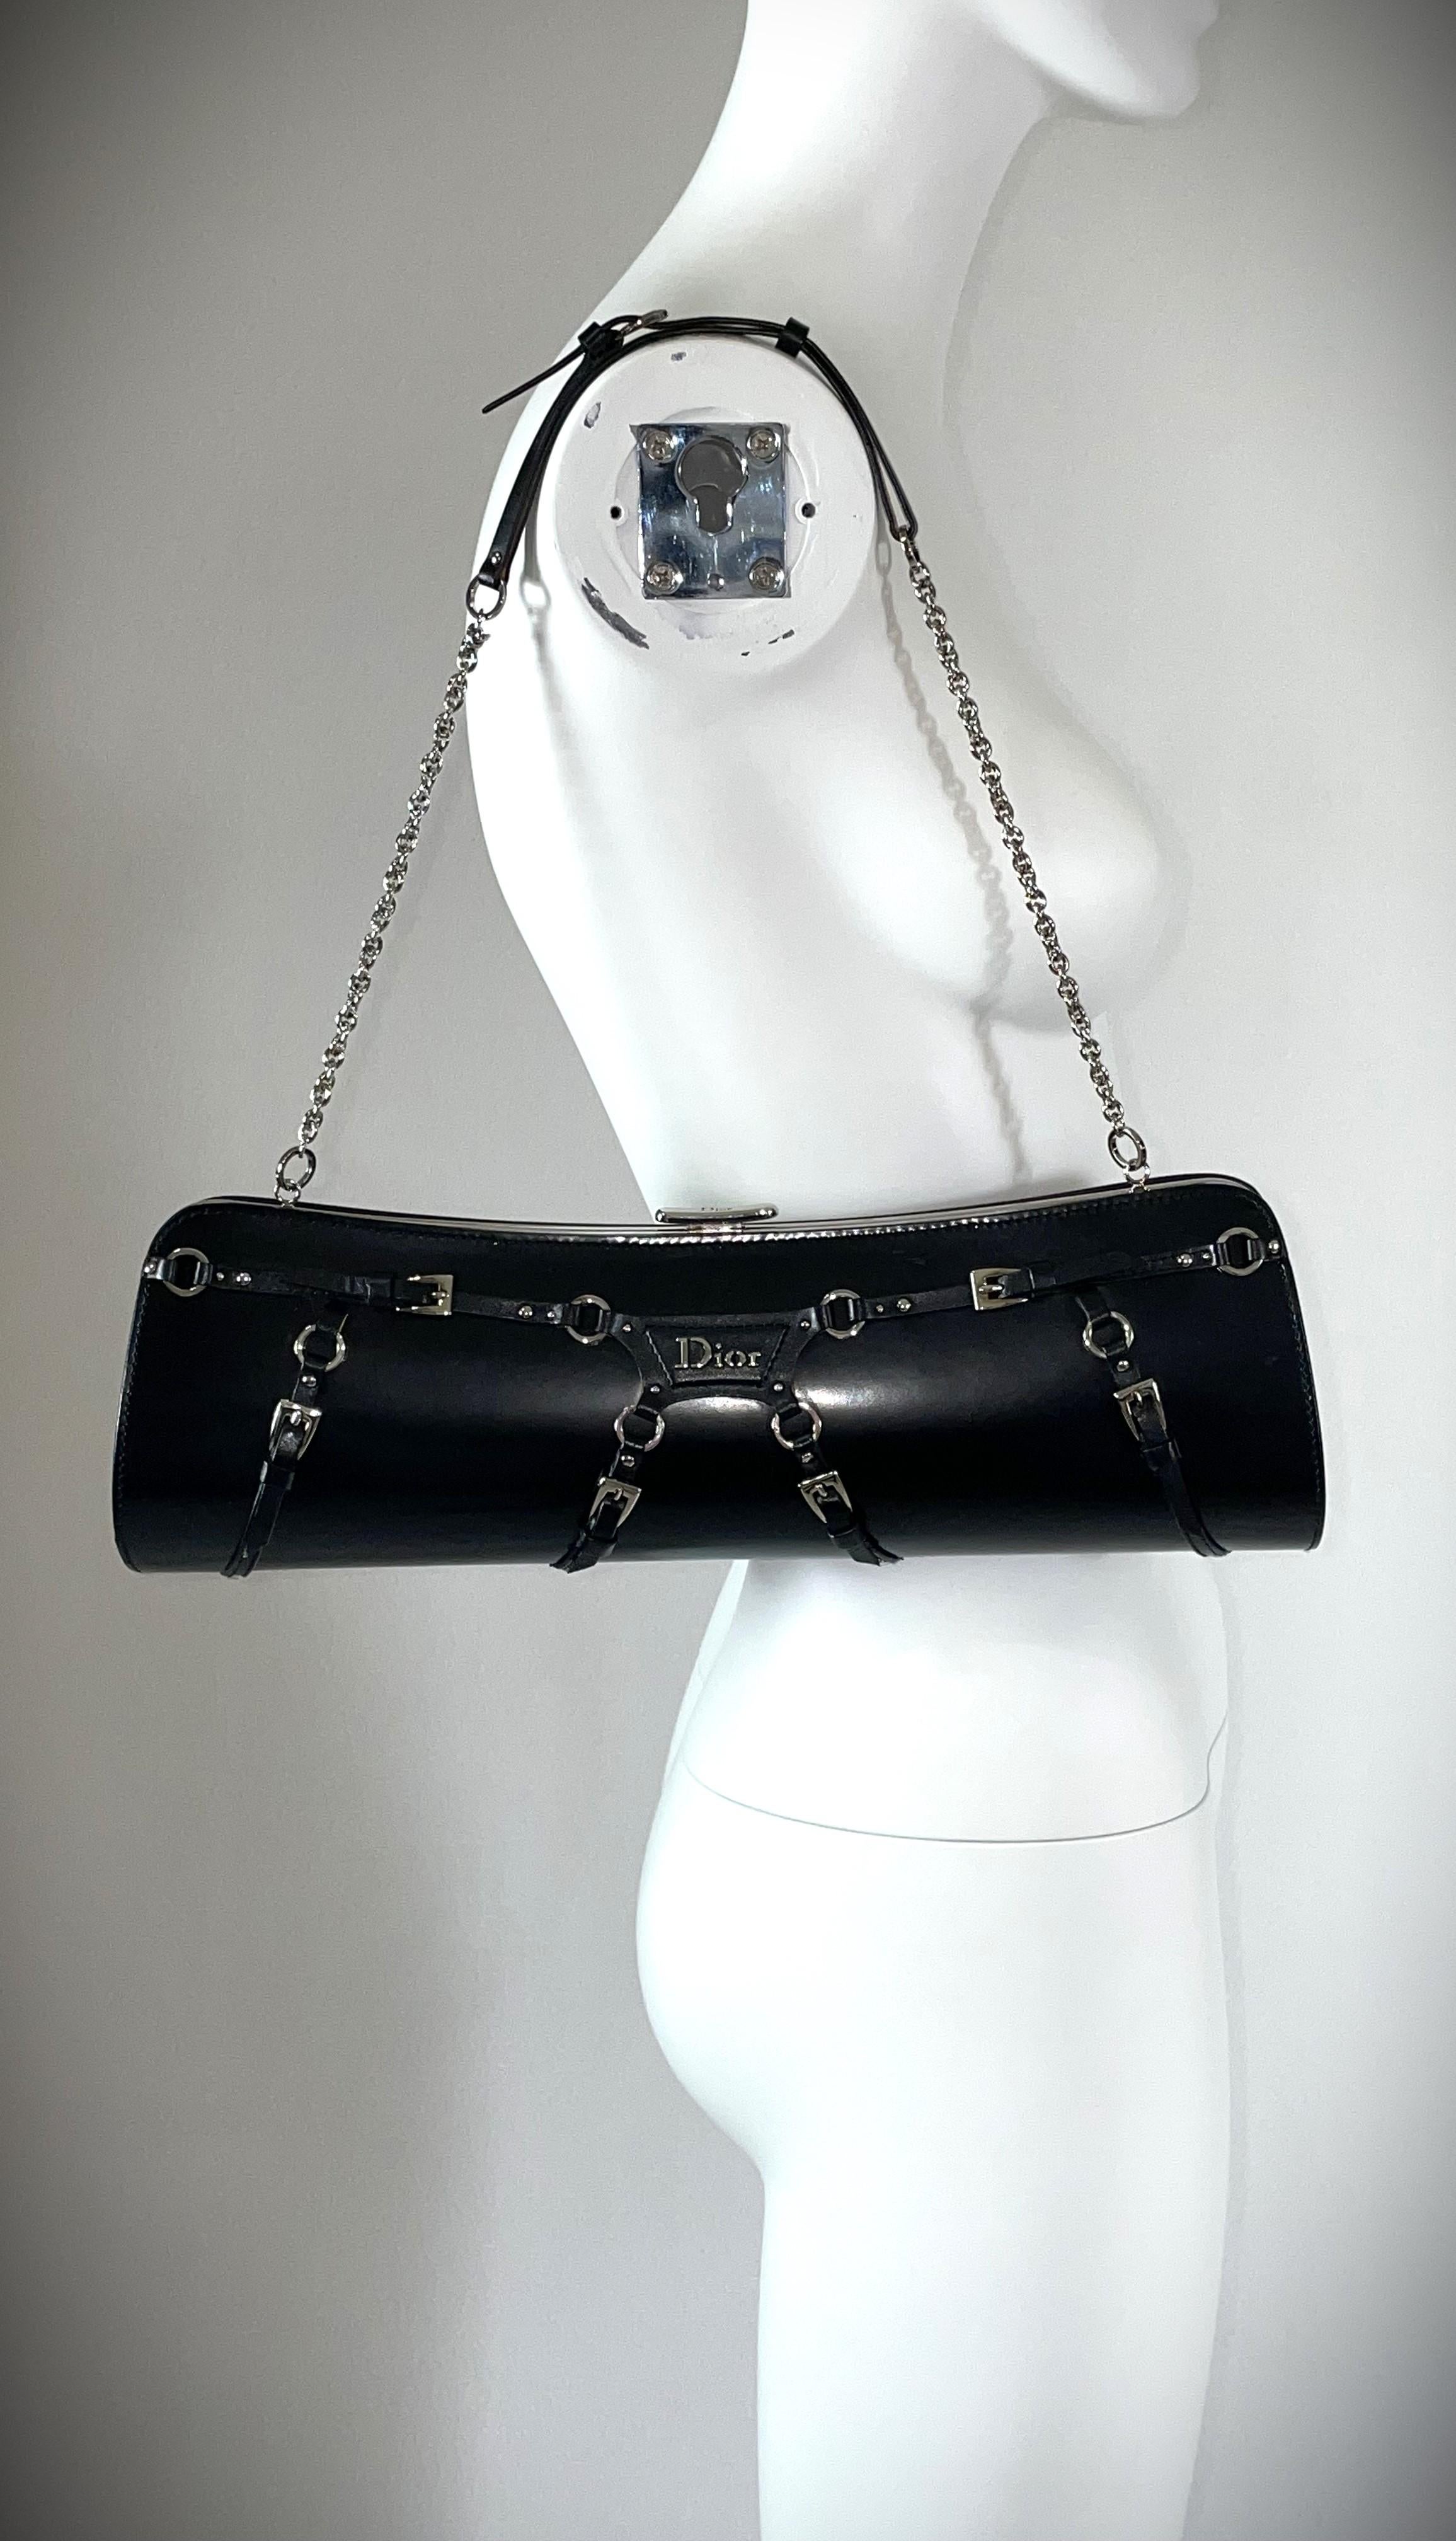 **THANK YOU FOR SHOPPING WITH MES DEUX FILLES**

DESIGNER: F/W 2003 Christian Dior by John Galliano Runway- strap can be placed inside the bag to use as a clutch
CONDITION:  Good- very light wear
FABRIC: Leather
SIZE: Extra long
COUNTRY MADE: France